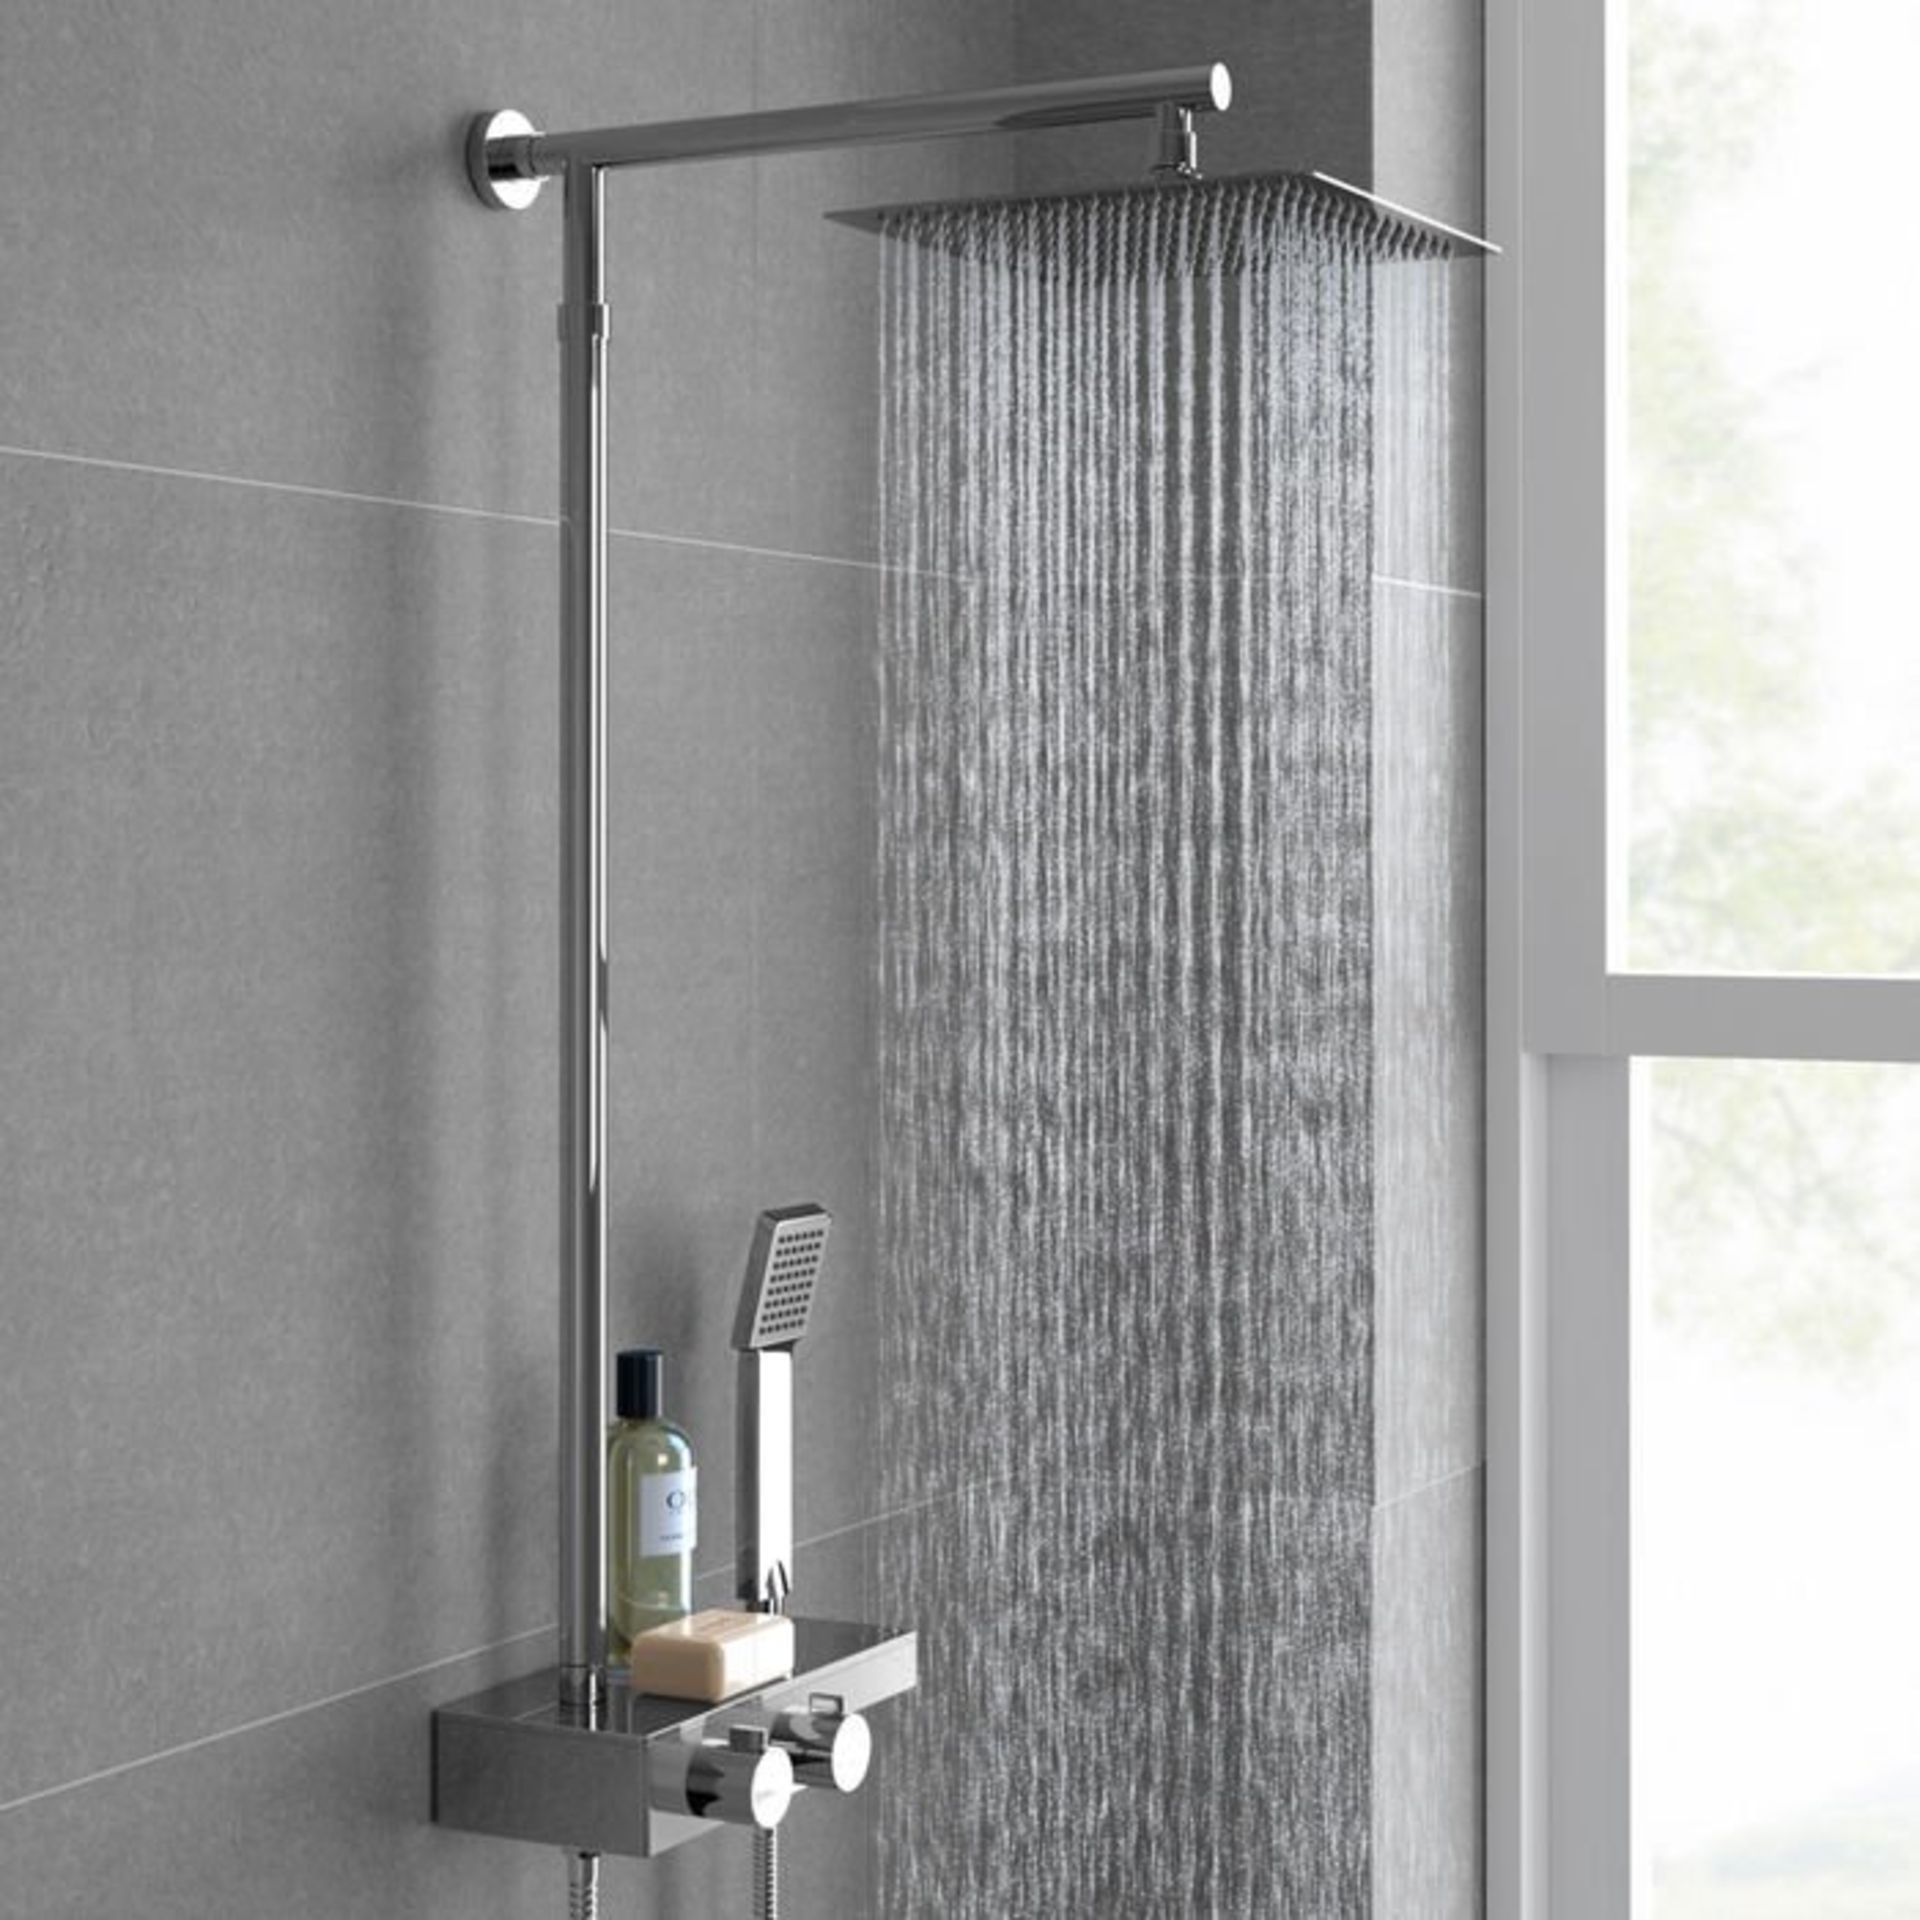 (A31) Thermostatic Exposed Shower Kit 250mm Square Head Handheld. RRP £349.99. We love this